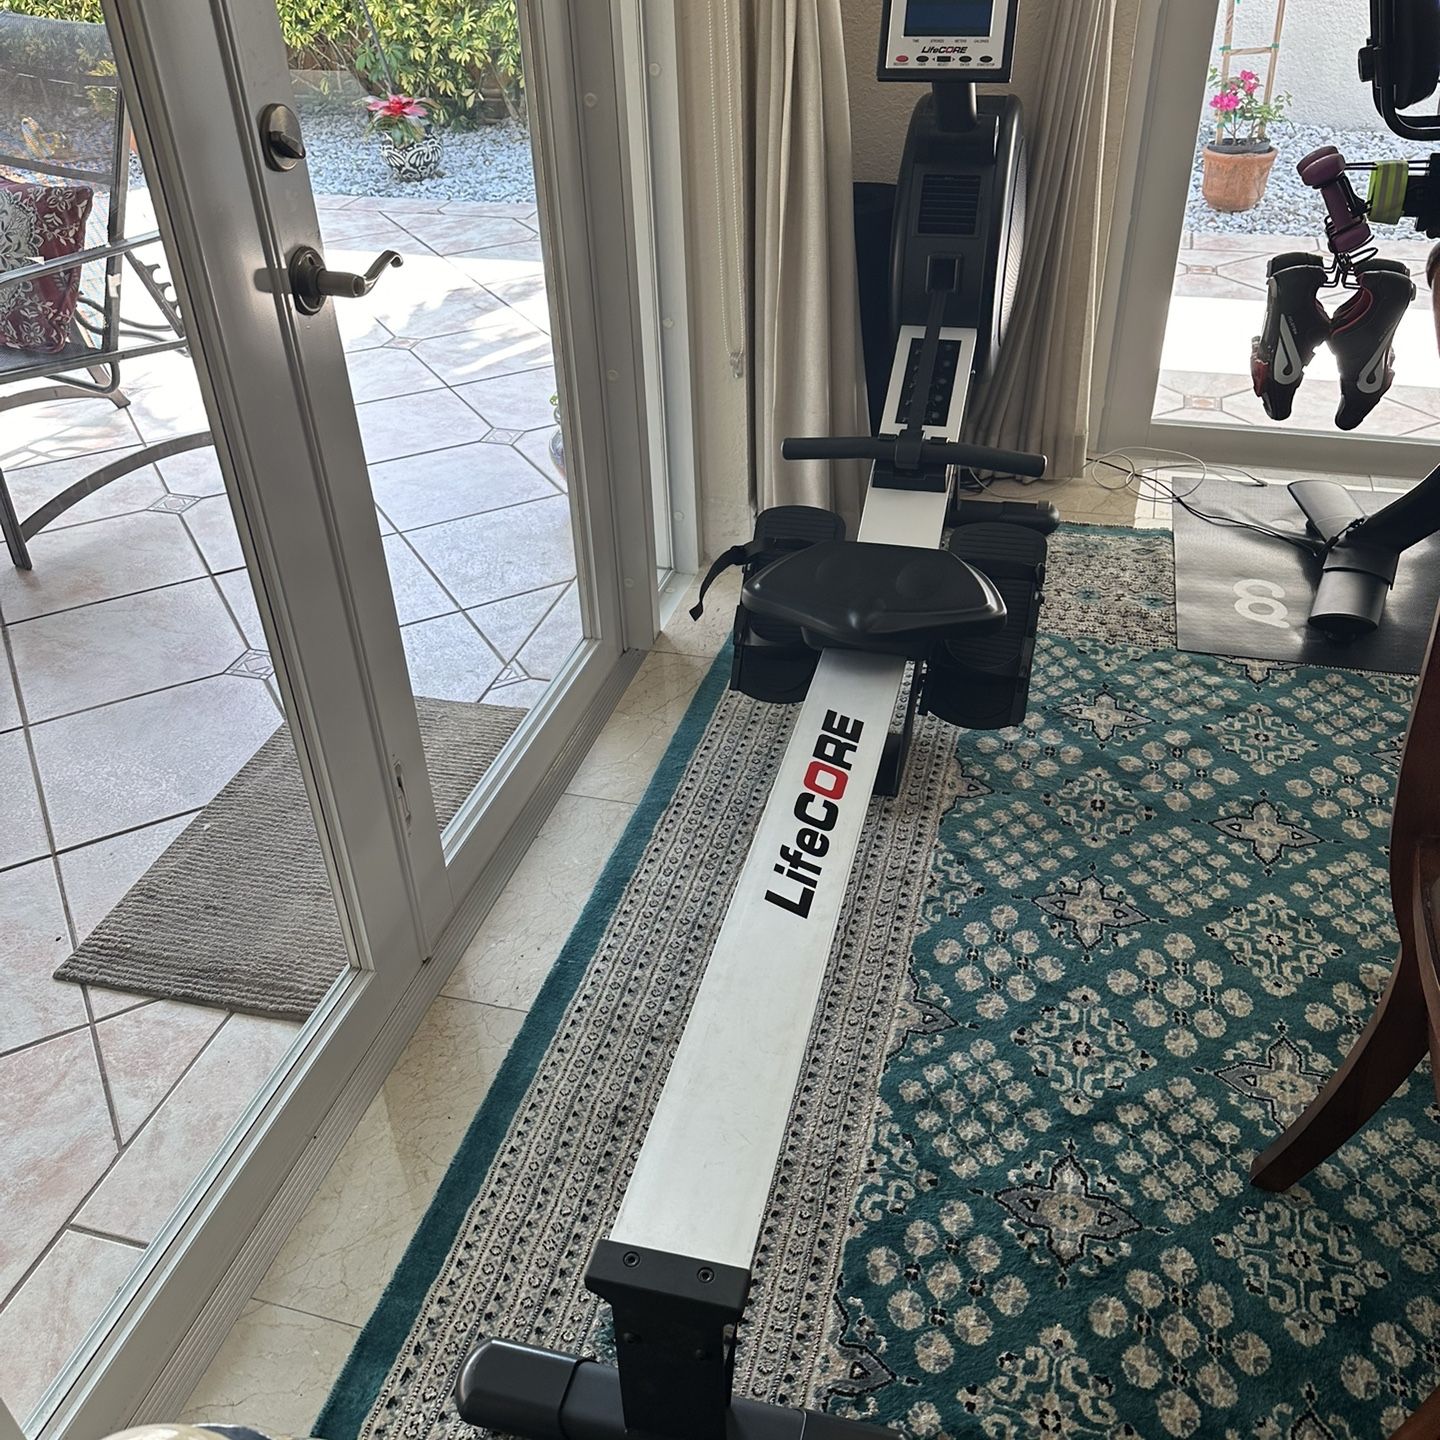 Rowing Machine With batteries 